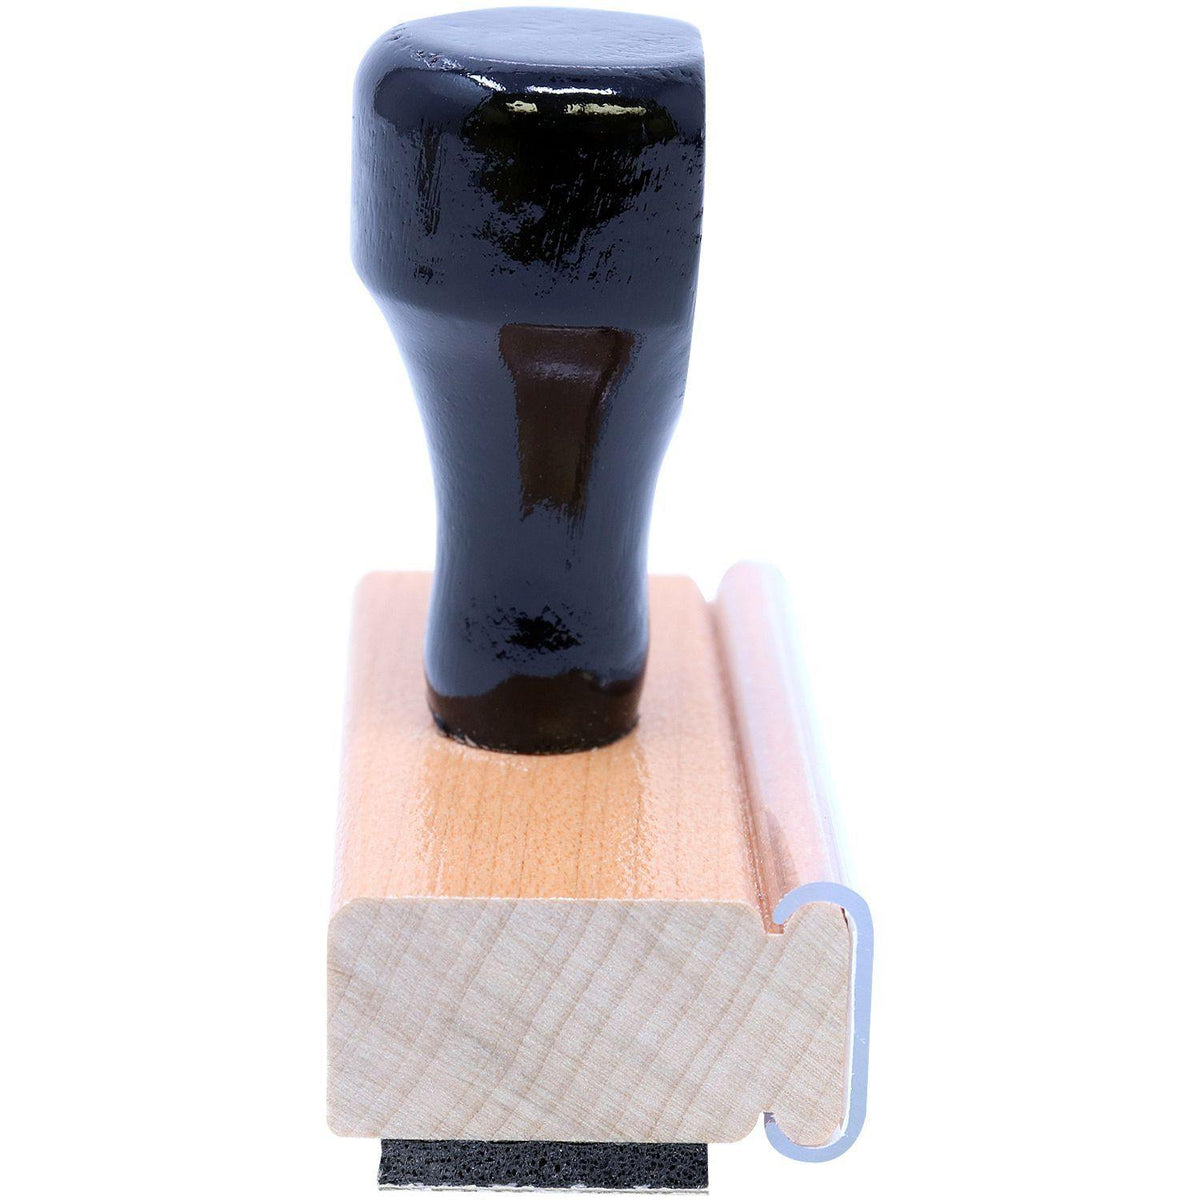 Round OK Rubber Stamp - Engineer Seal Stamps - Brand_Acorn, Impression Size_Small, Stamp Type_Regular Stamp, Type of Use_General